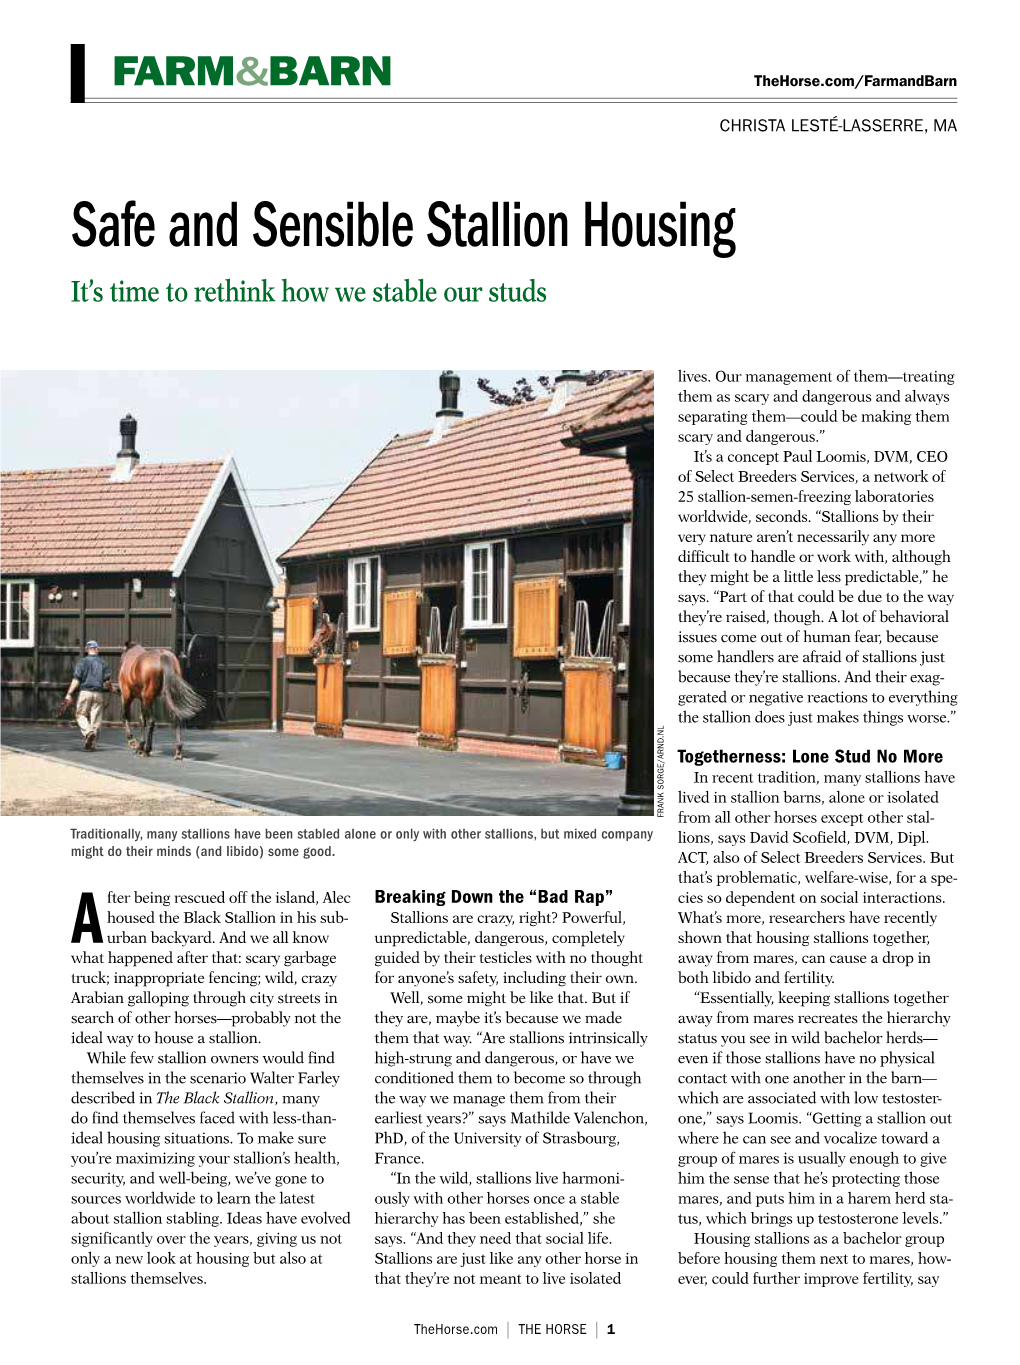 Safe and Sensible Stallion Housing It’S Time to Rethink How We Stable Our Studs